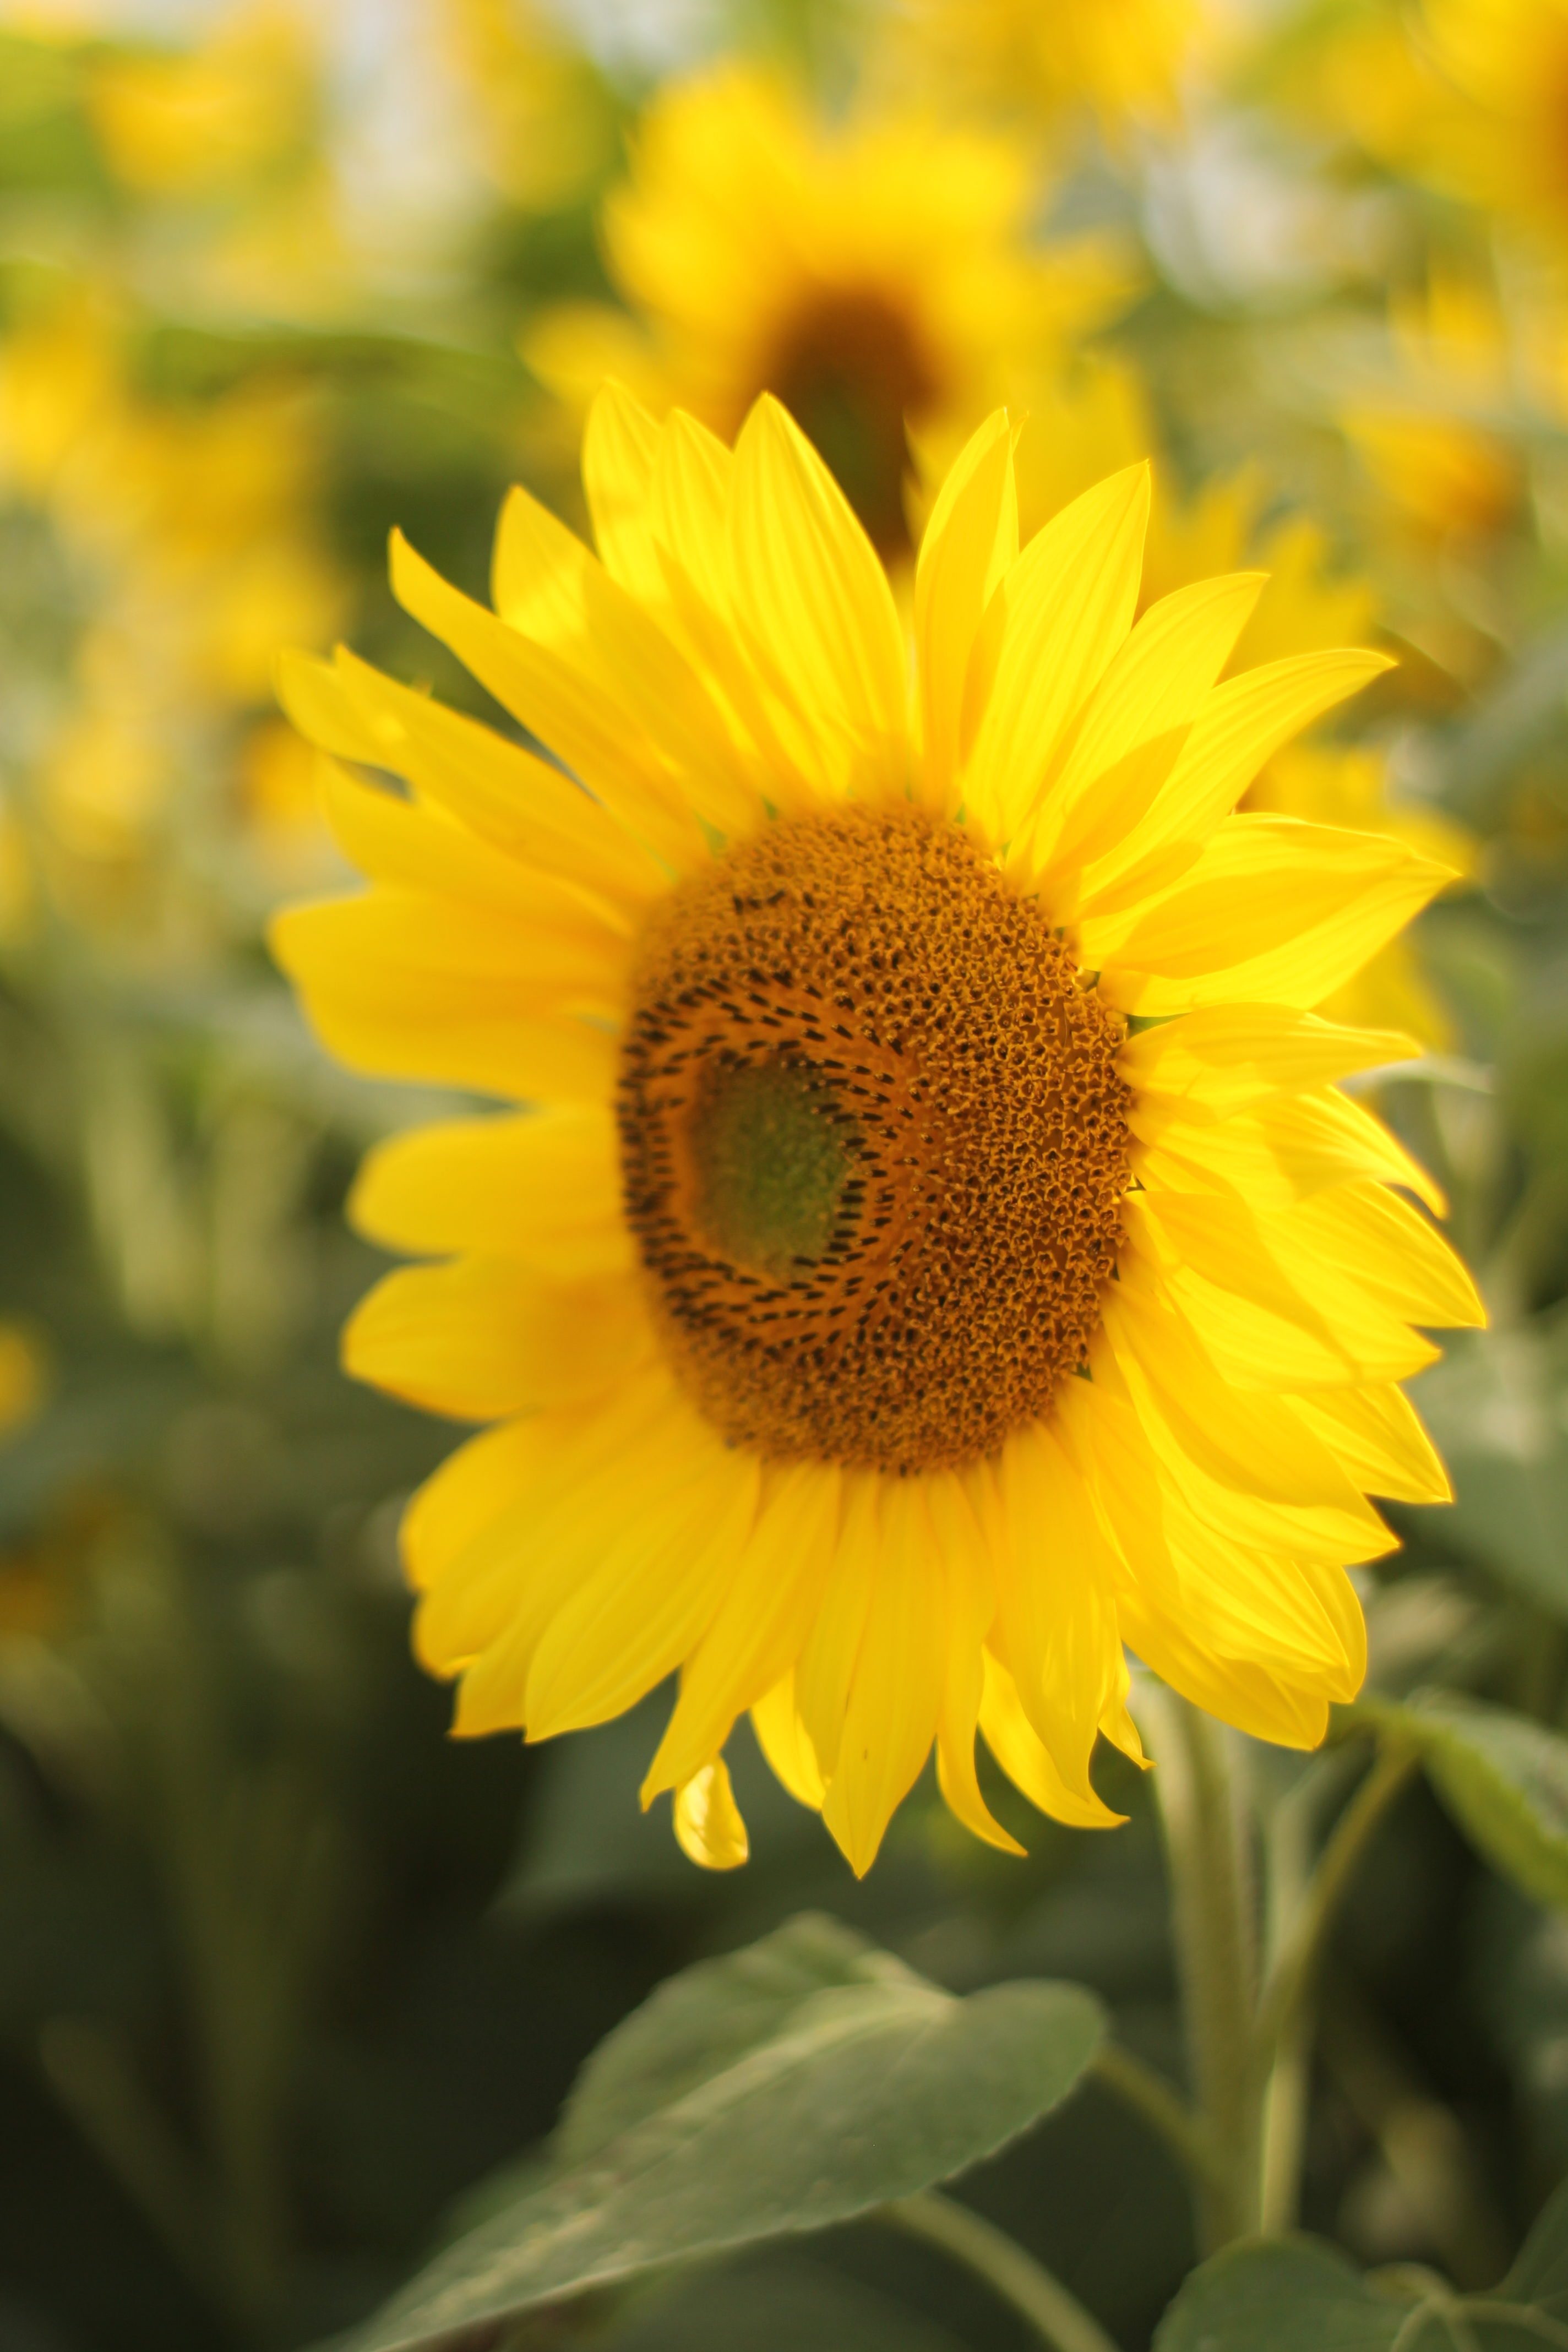 Sunflowers at Colby Farmstand in Newbury, MA | Our Little Home Style